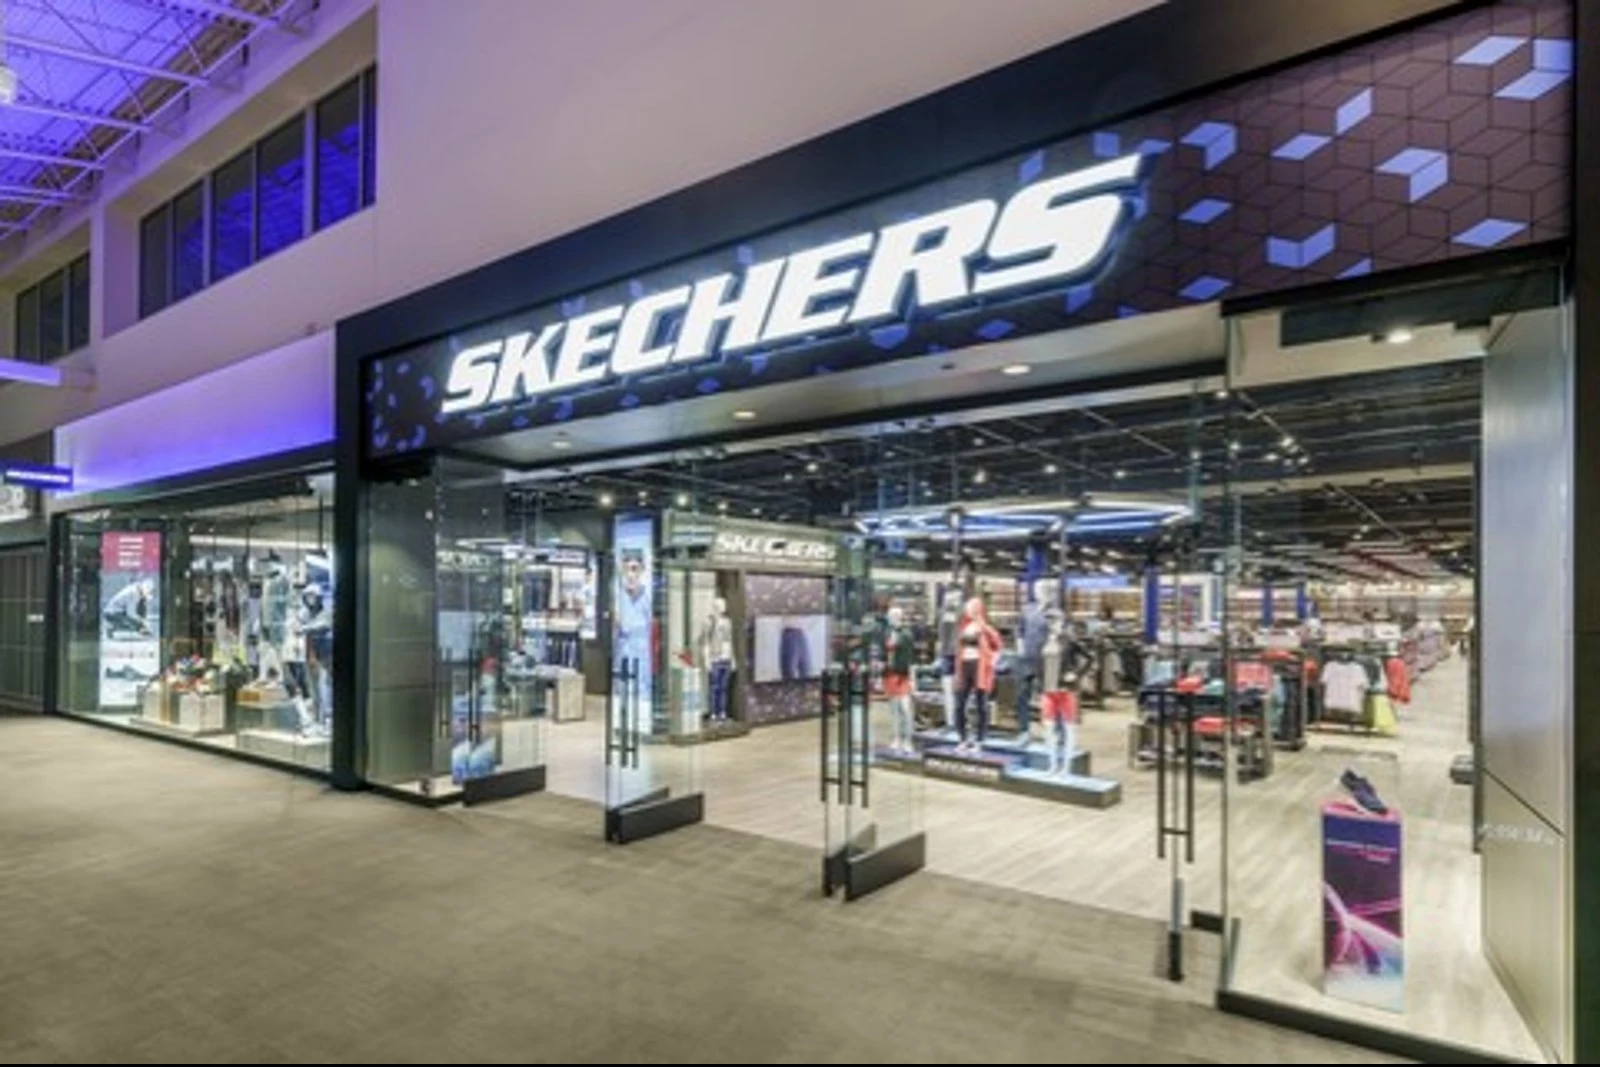 Skechers has opened a store in New Jersey … and it's big